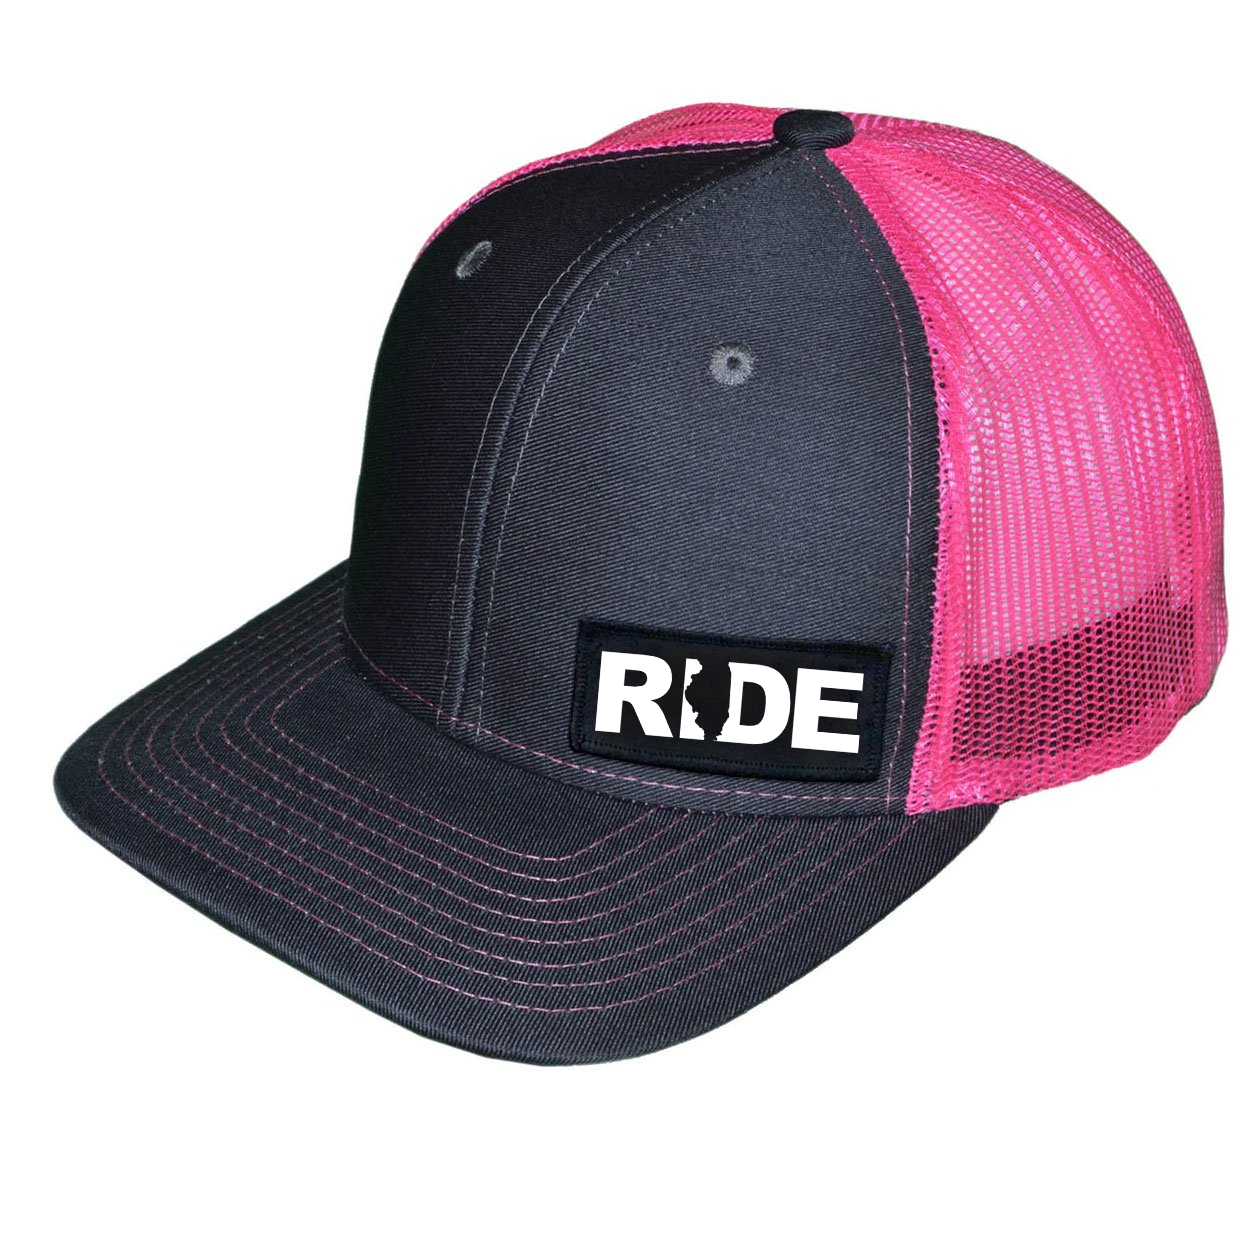 Ride Illinois Night Out Woven Patch Snapback Trucker Hat Charcoal/Neon Pink (White Logo)